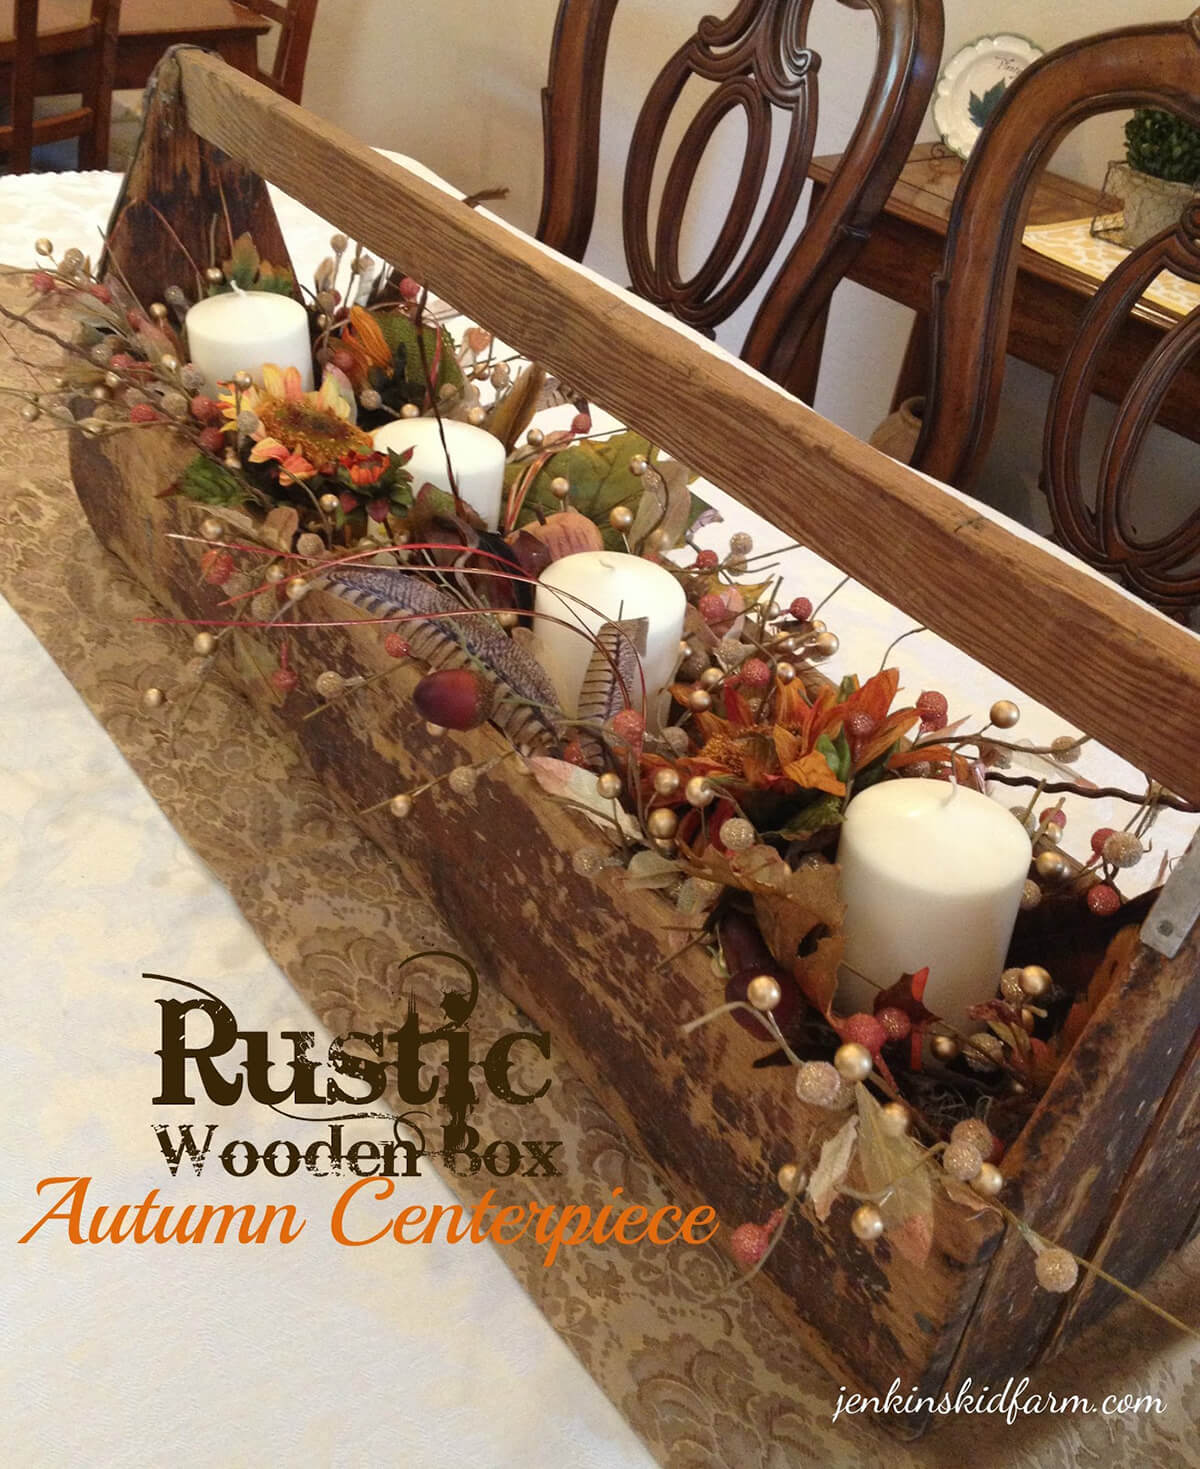 Lively Autumn Centerpiece with Leaves and Berries